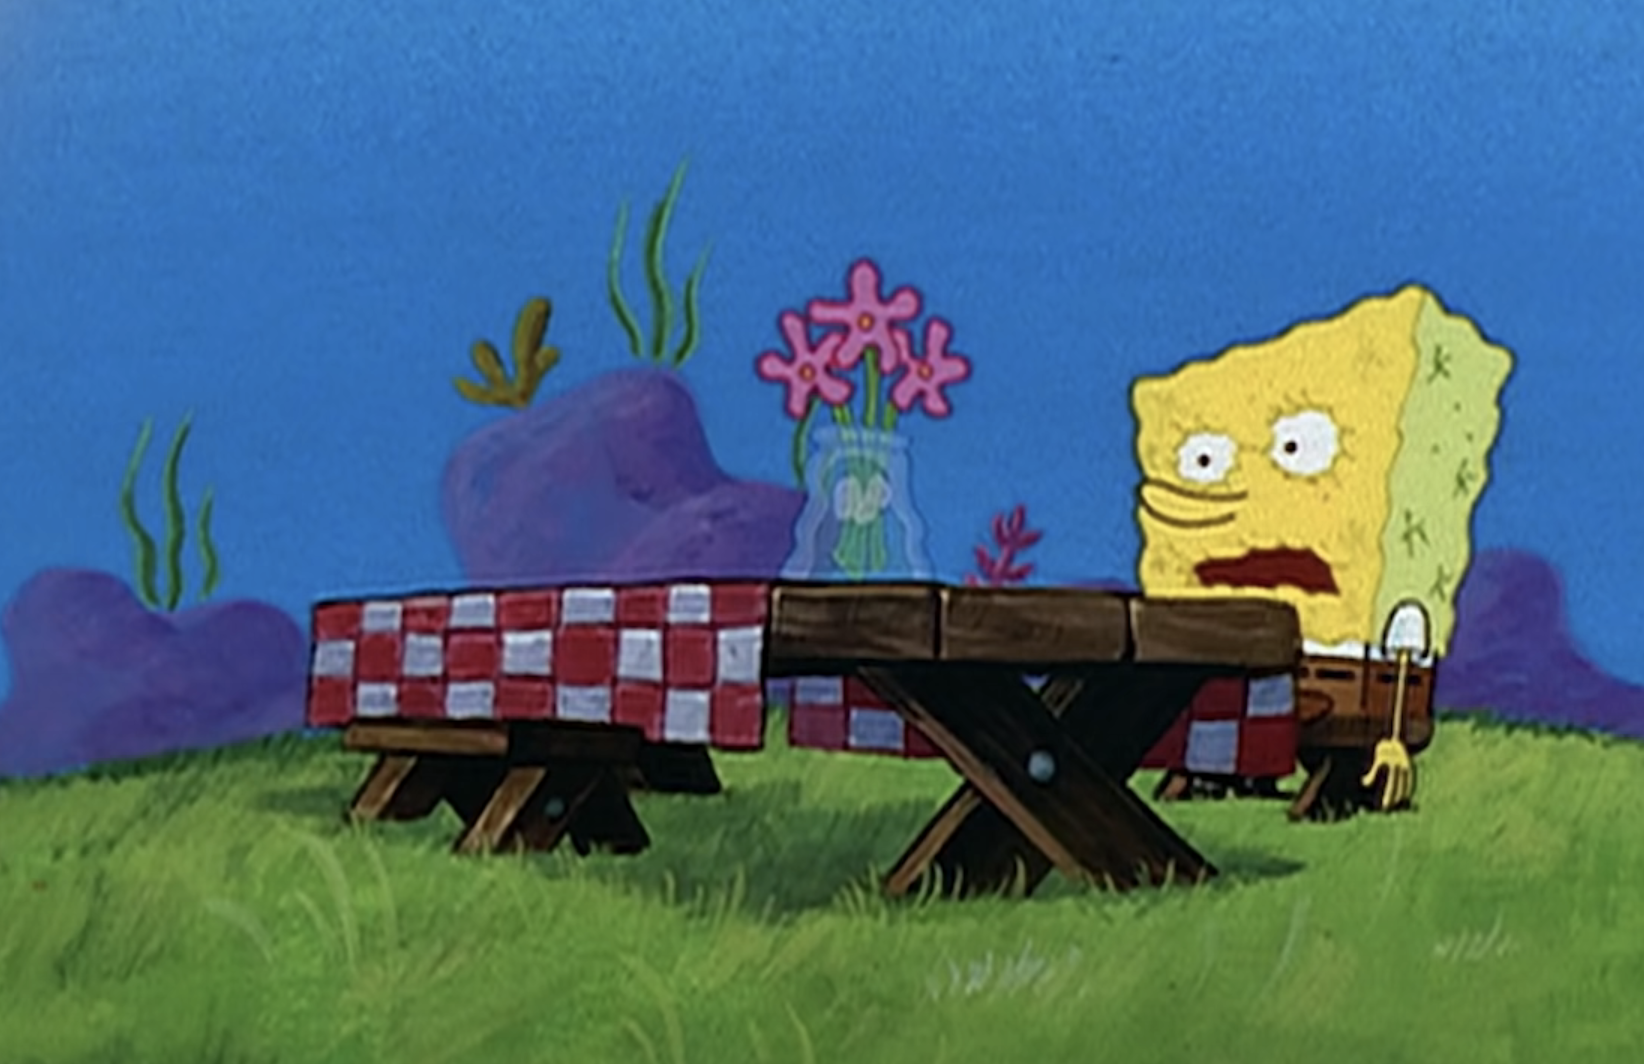 SpongeBob sitting at a picnic table looking disappointed, with Squidward standing behind the table